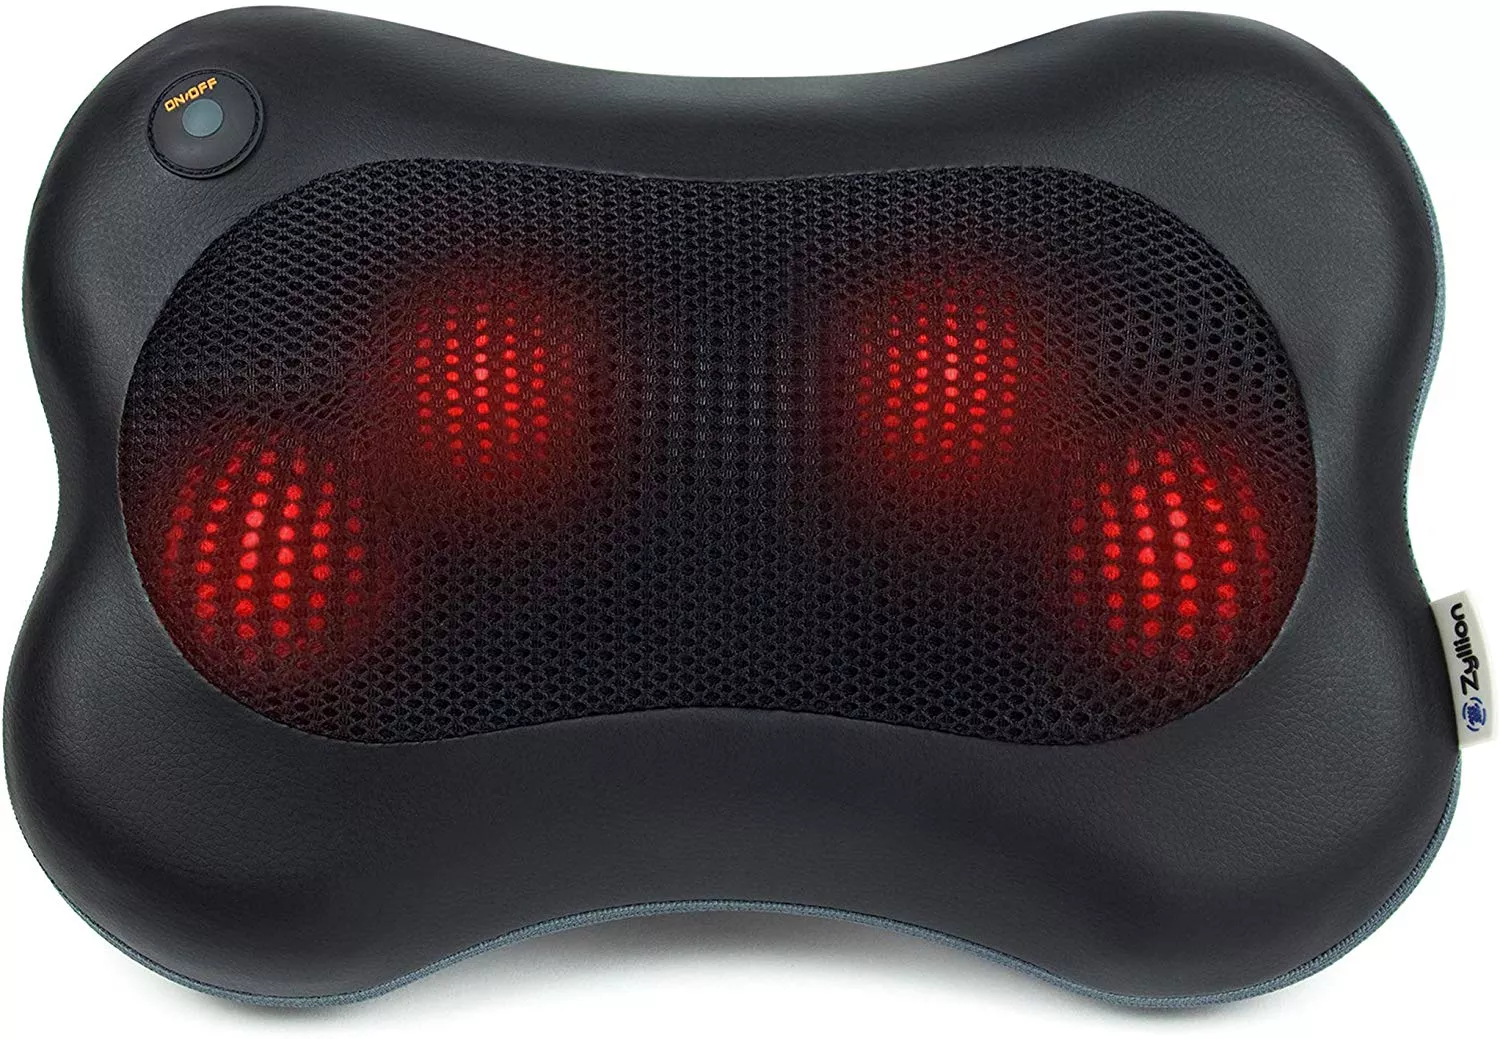 Best Gifts For Hairdressers 2023: Back & Body Massager 2023